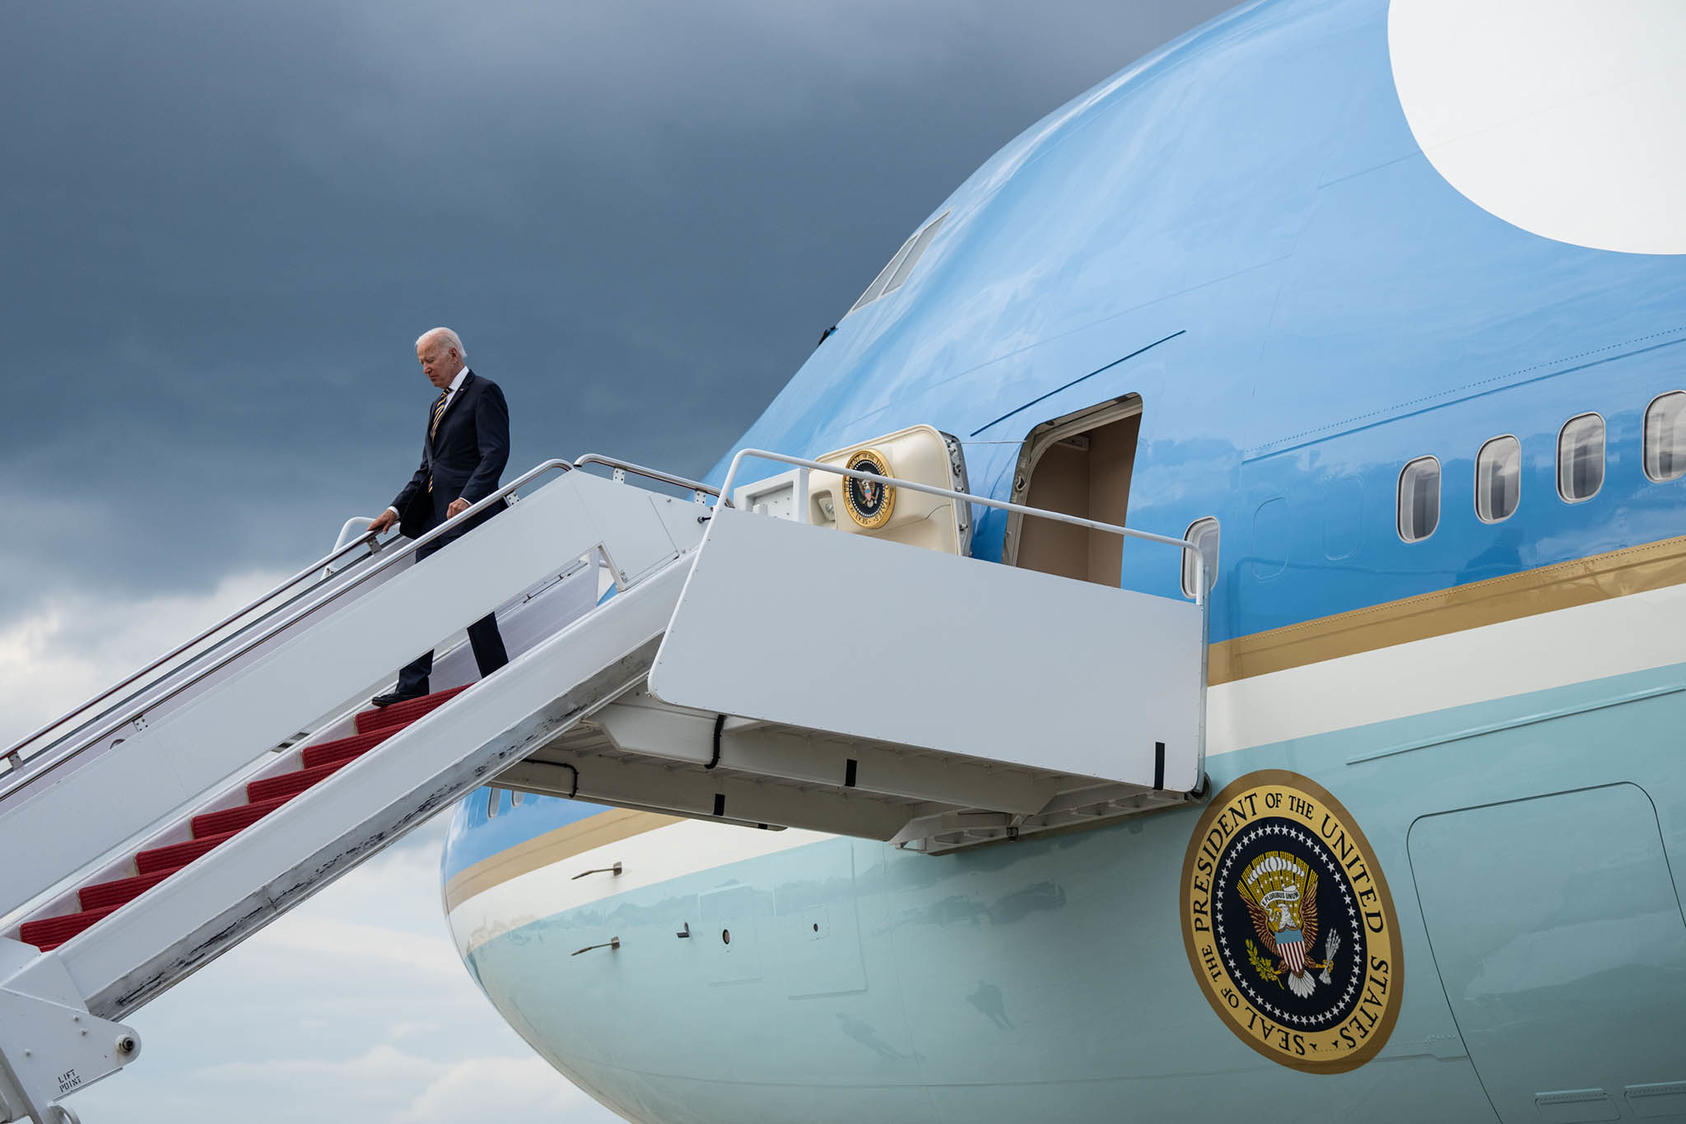 President Biden returns to Washington last week, days before his first head of state visit to the Middle East. He will aim to boost the regional cooperation advanced by the Abraham Accords and keep Russia isolated. (Haiyun Jiang/The New York Times)